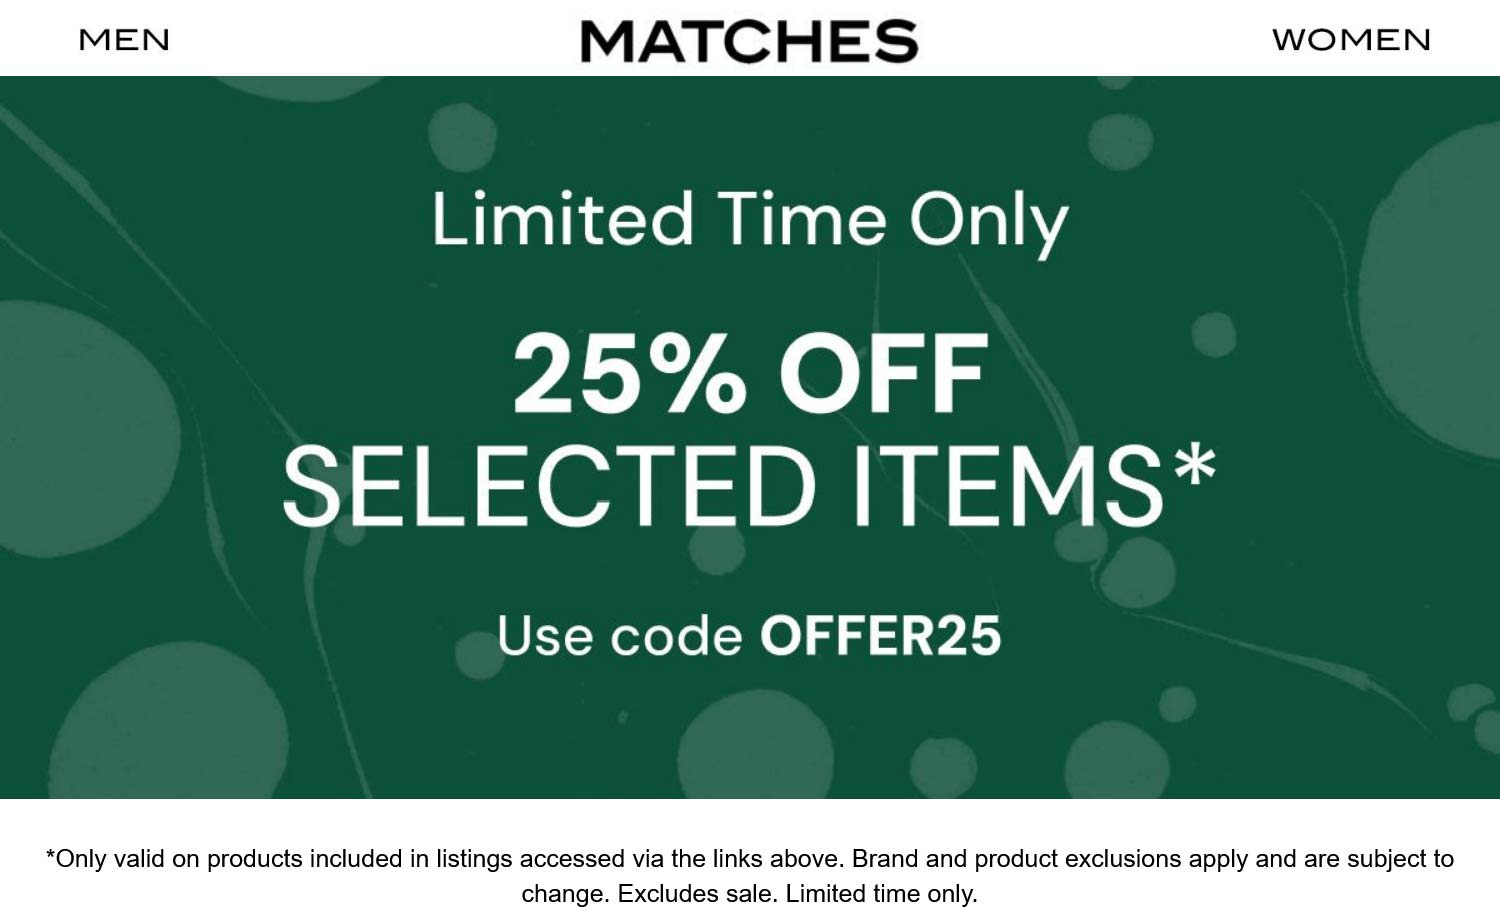 Matches stores Coupon  25% off online at Matches via promo code OFFER25 #matches 